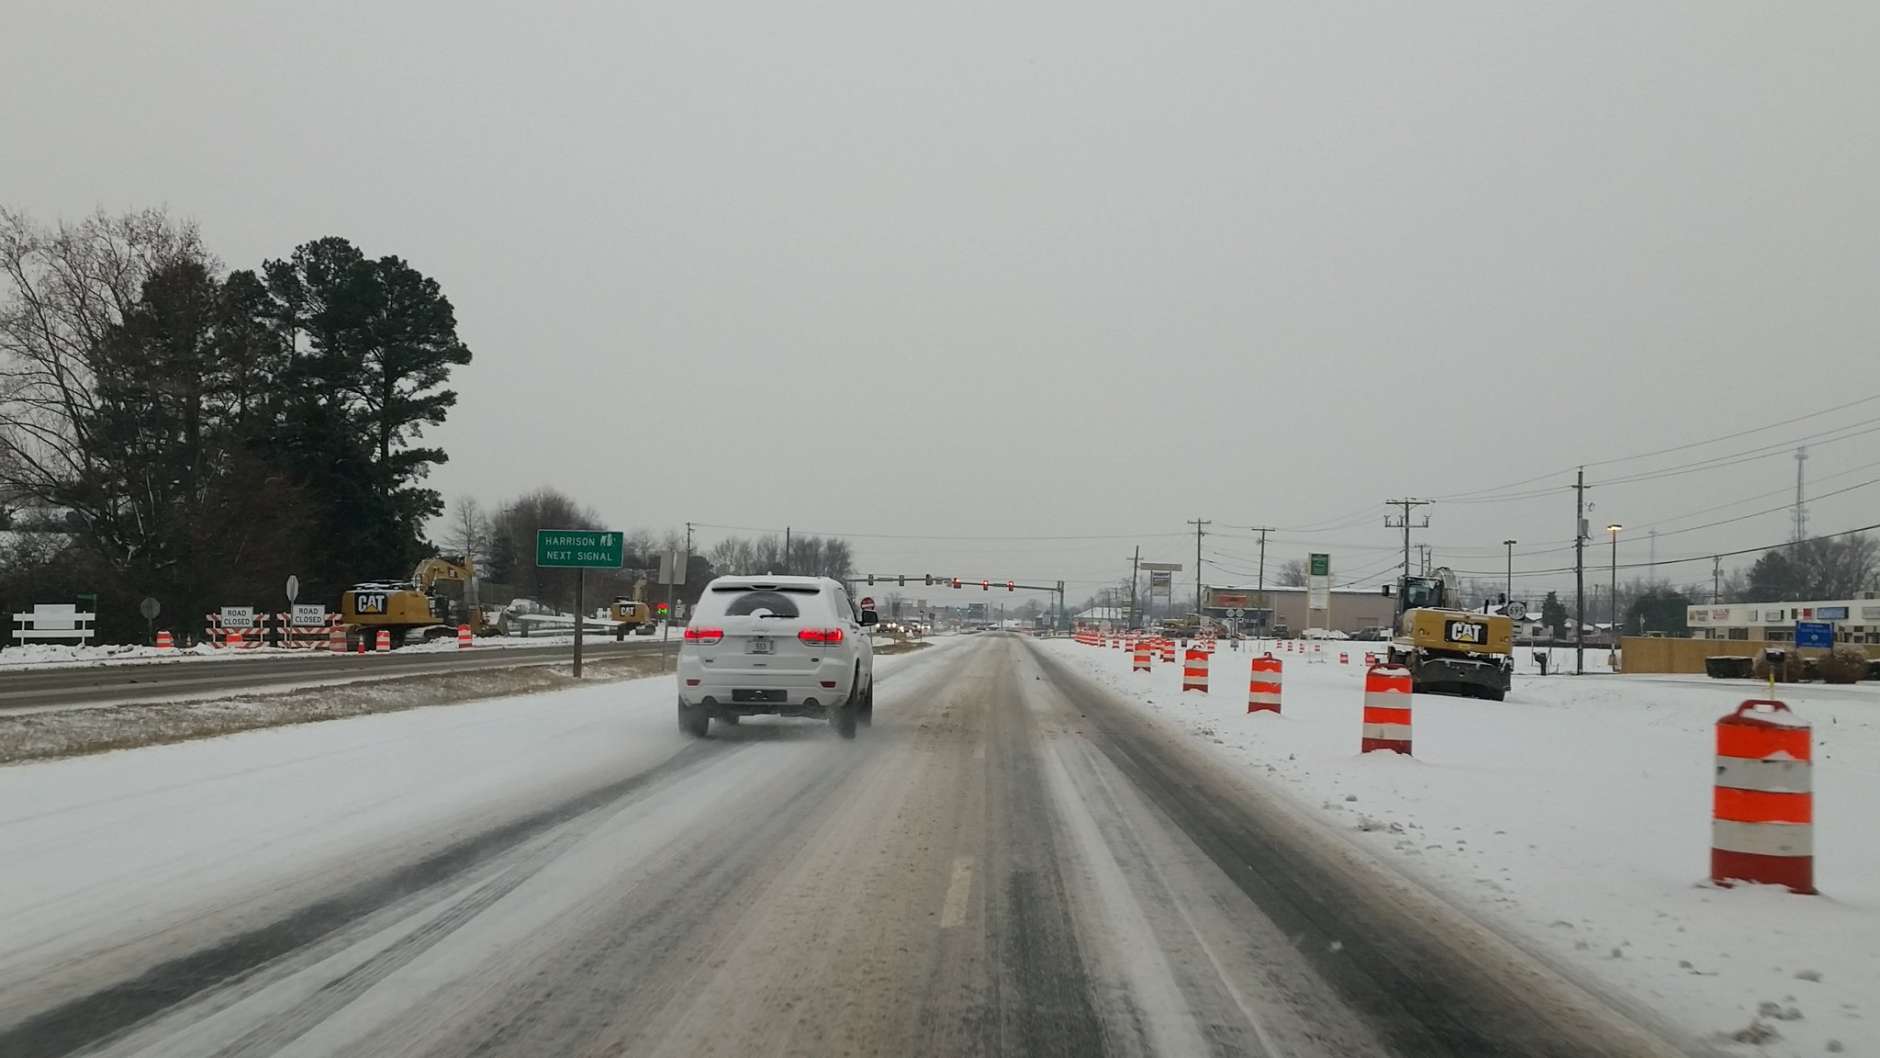 Roads were slippery further south on Route 1 in Spotsylvania on Saturday morning. (WTOP/Kathy Stewart)